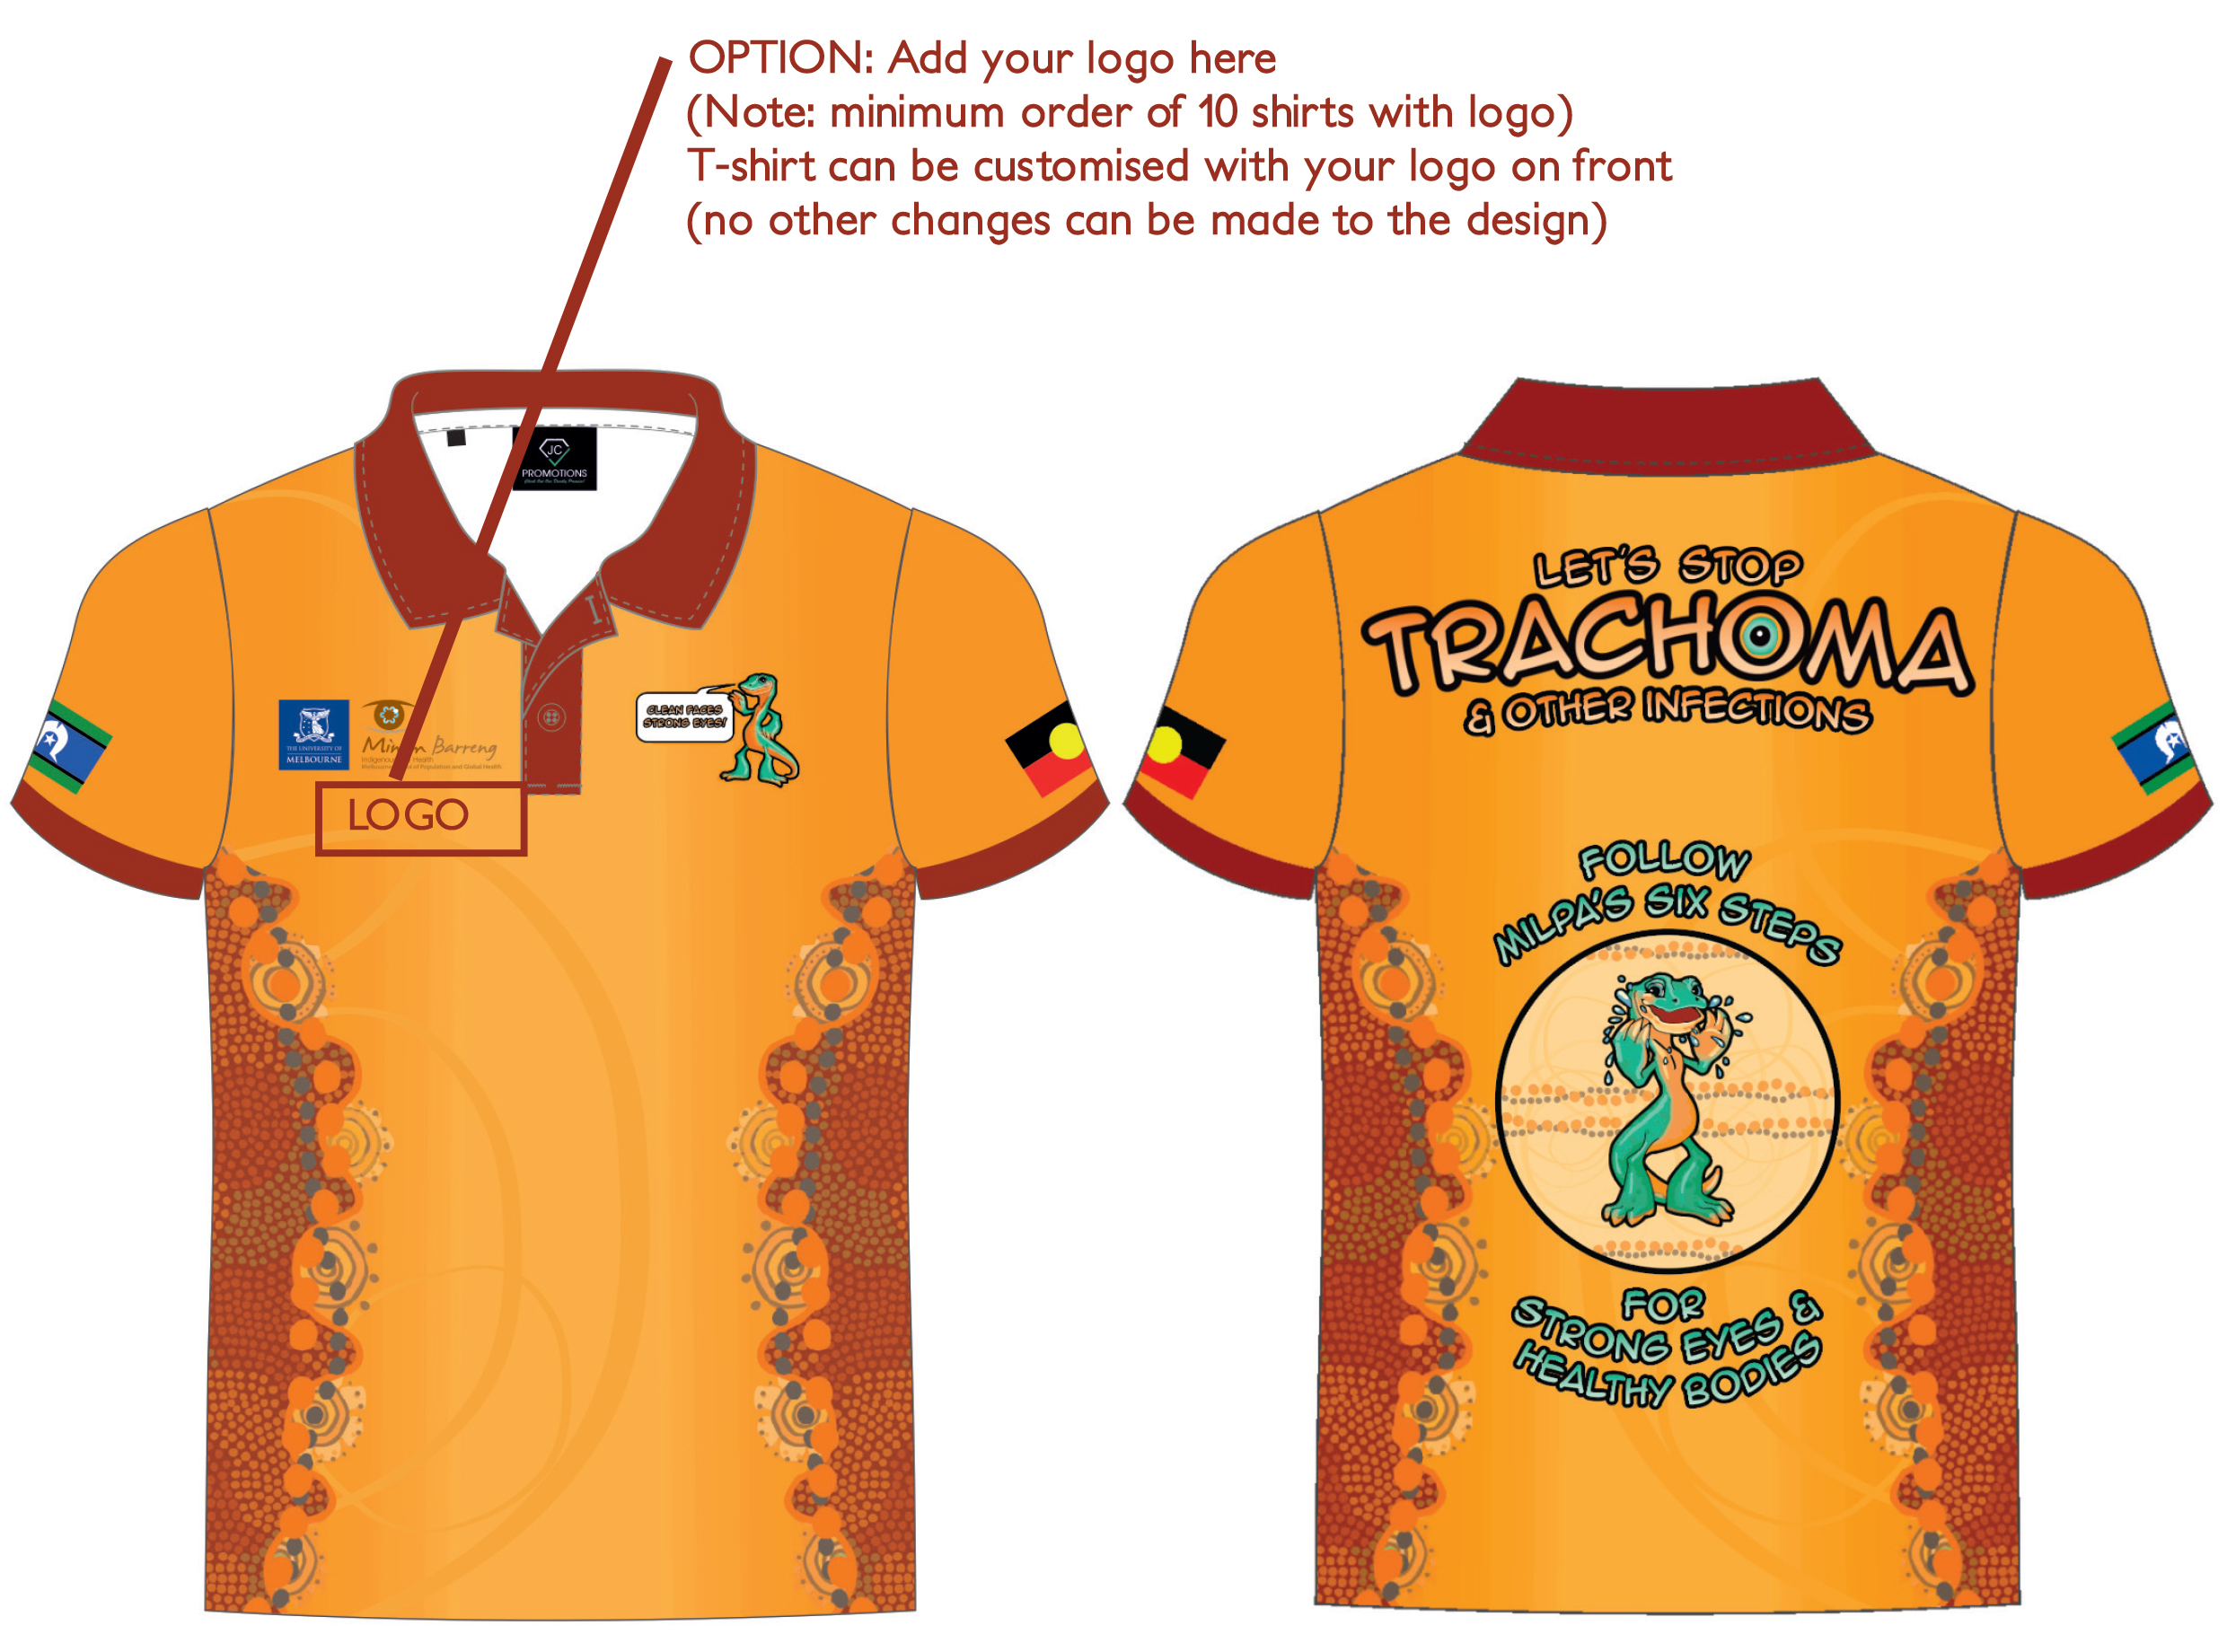 sample of new trachoma tshirt design. Updated artwork to back of tshirt